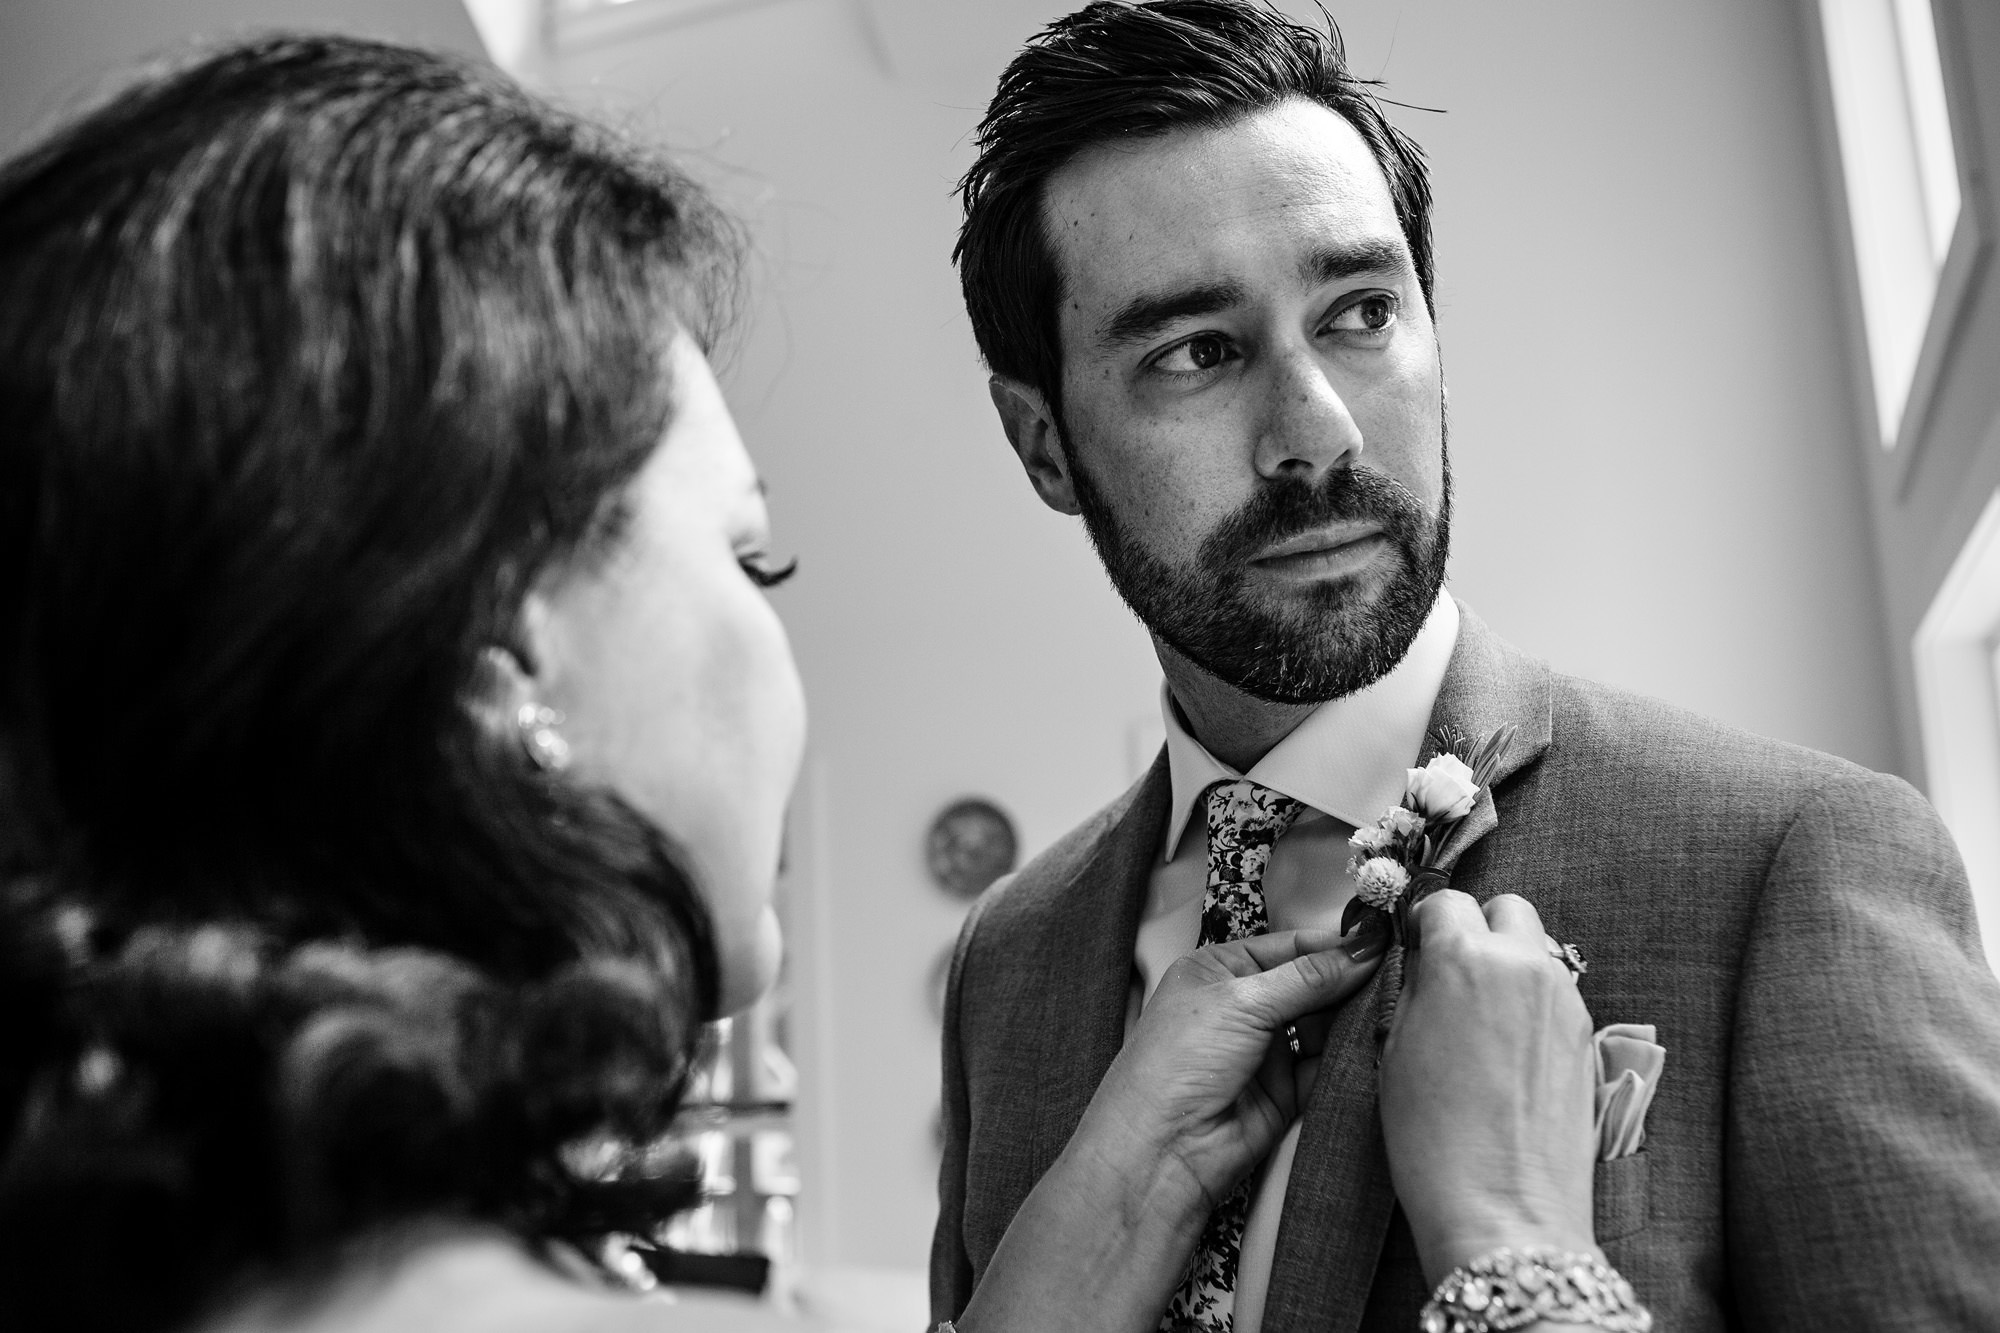 The mother of the groom helps her son get dressed at his private residence wedding